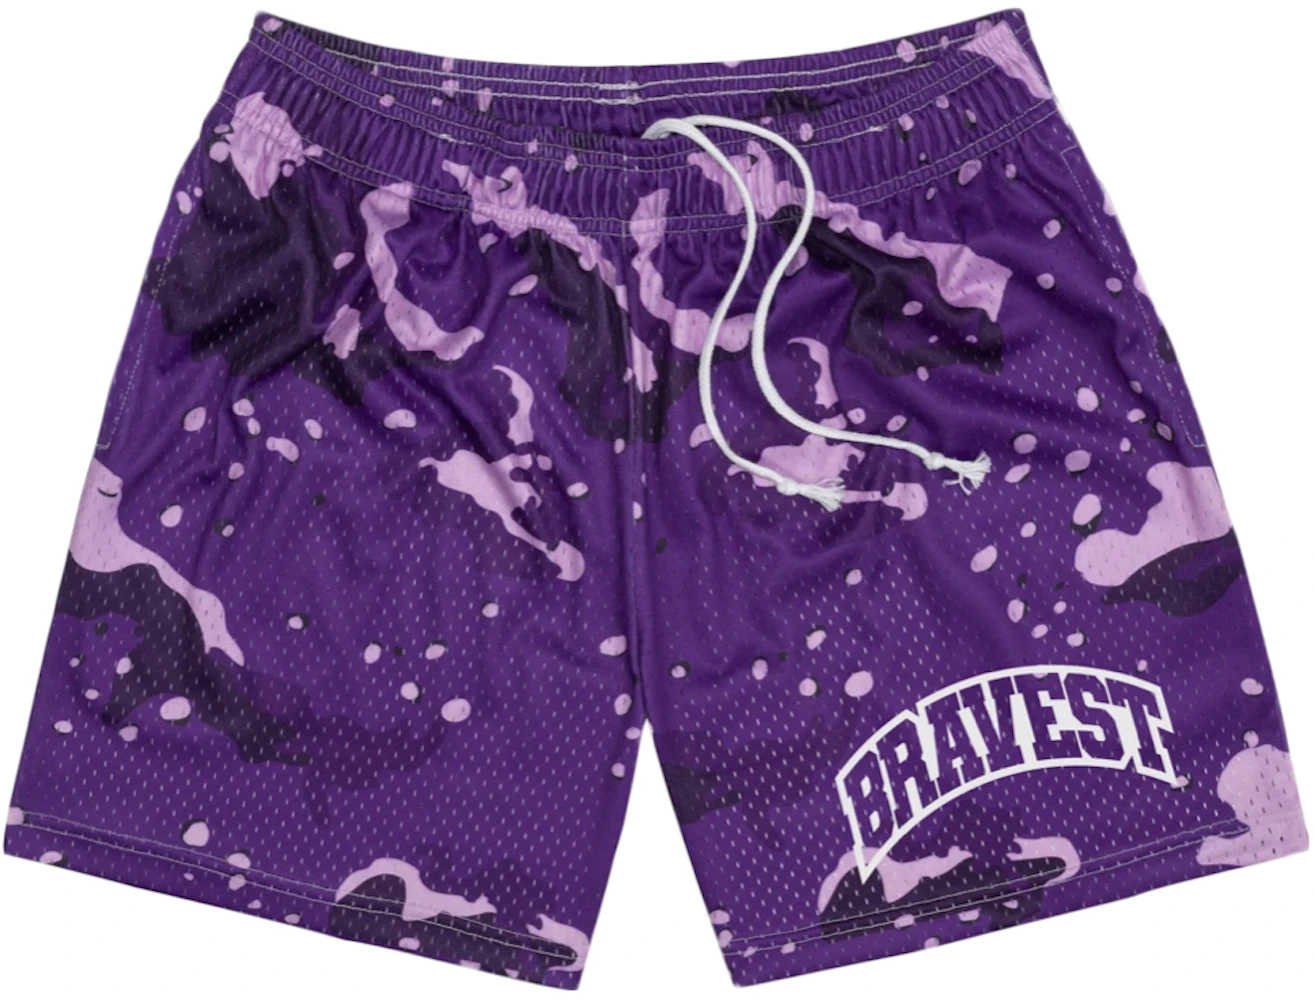 Bravest Studios Barbed WIre White/Purple Shorts Size Large Brand